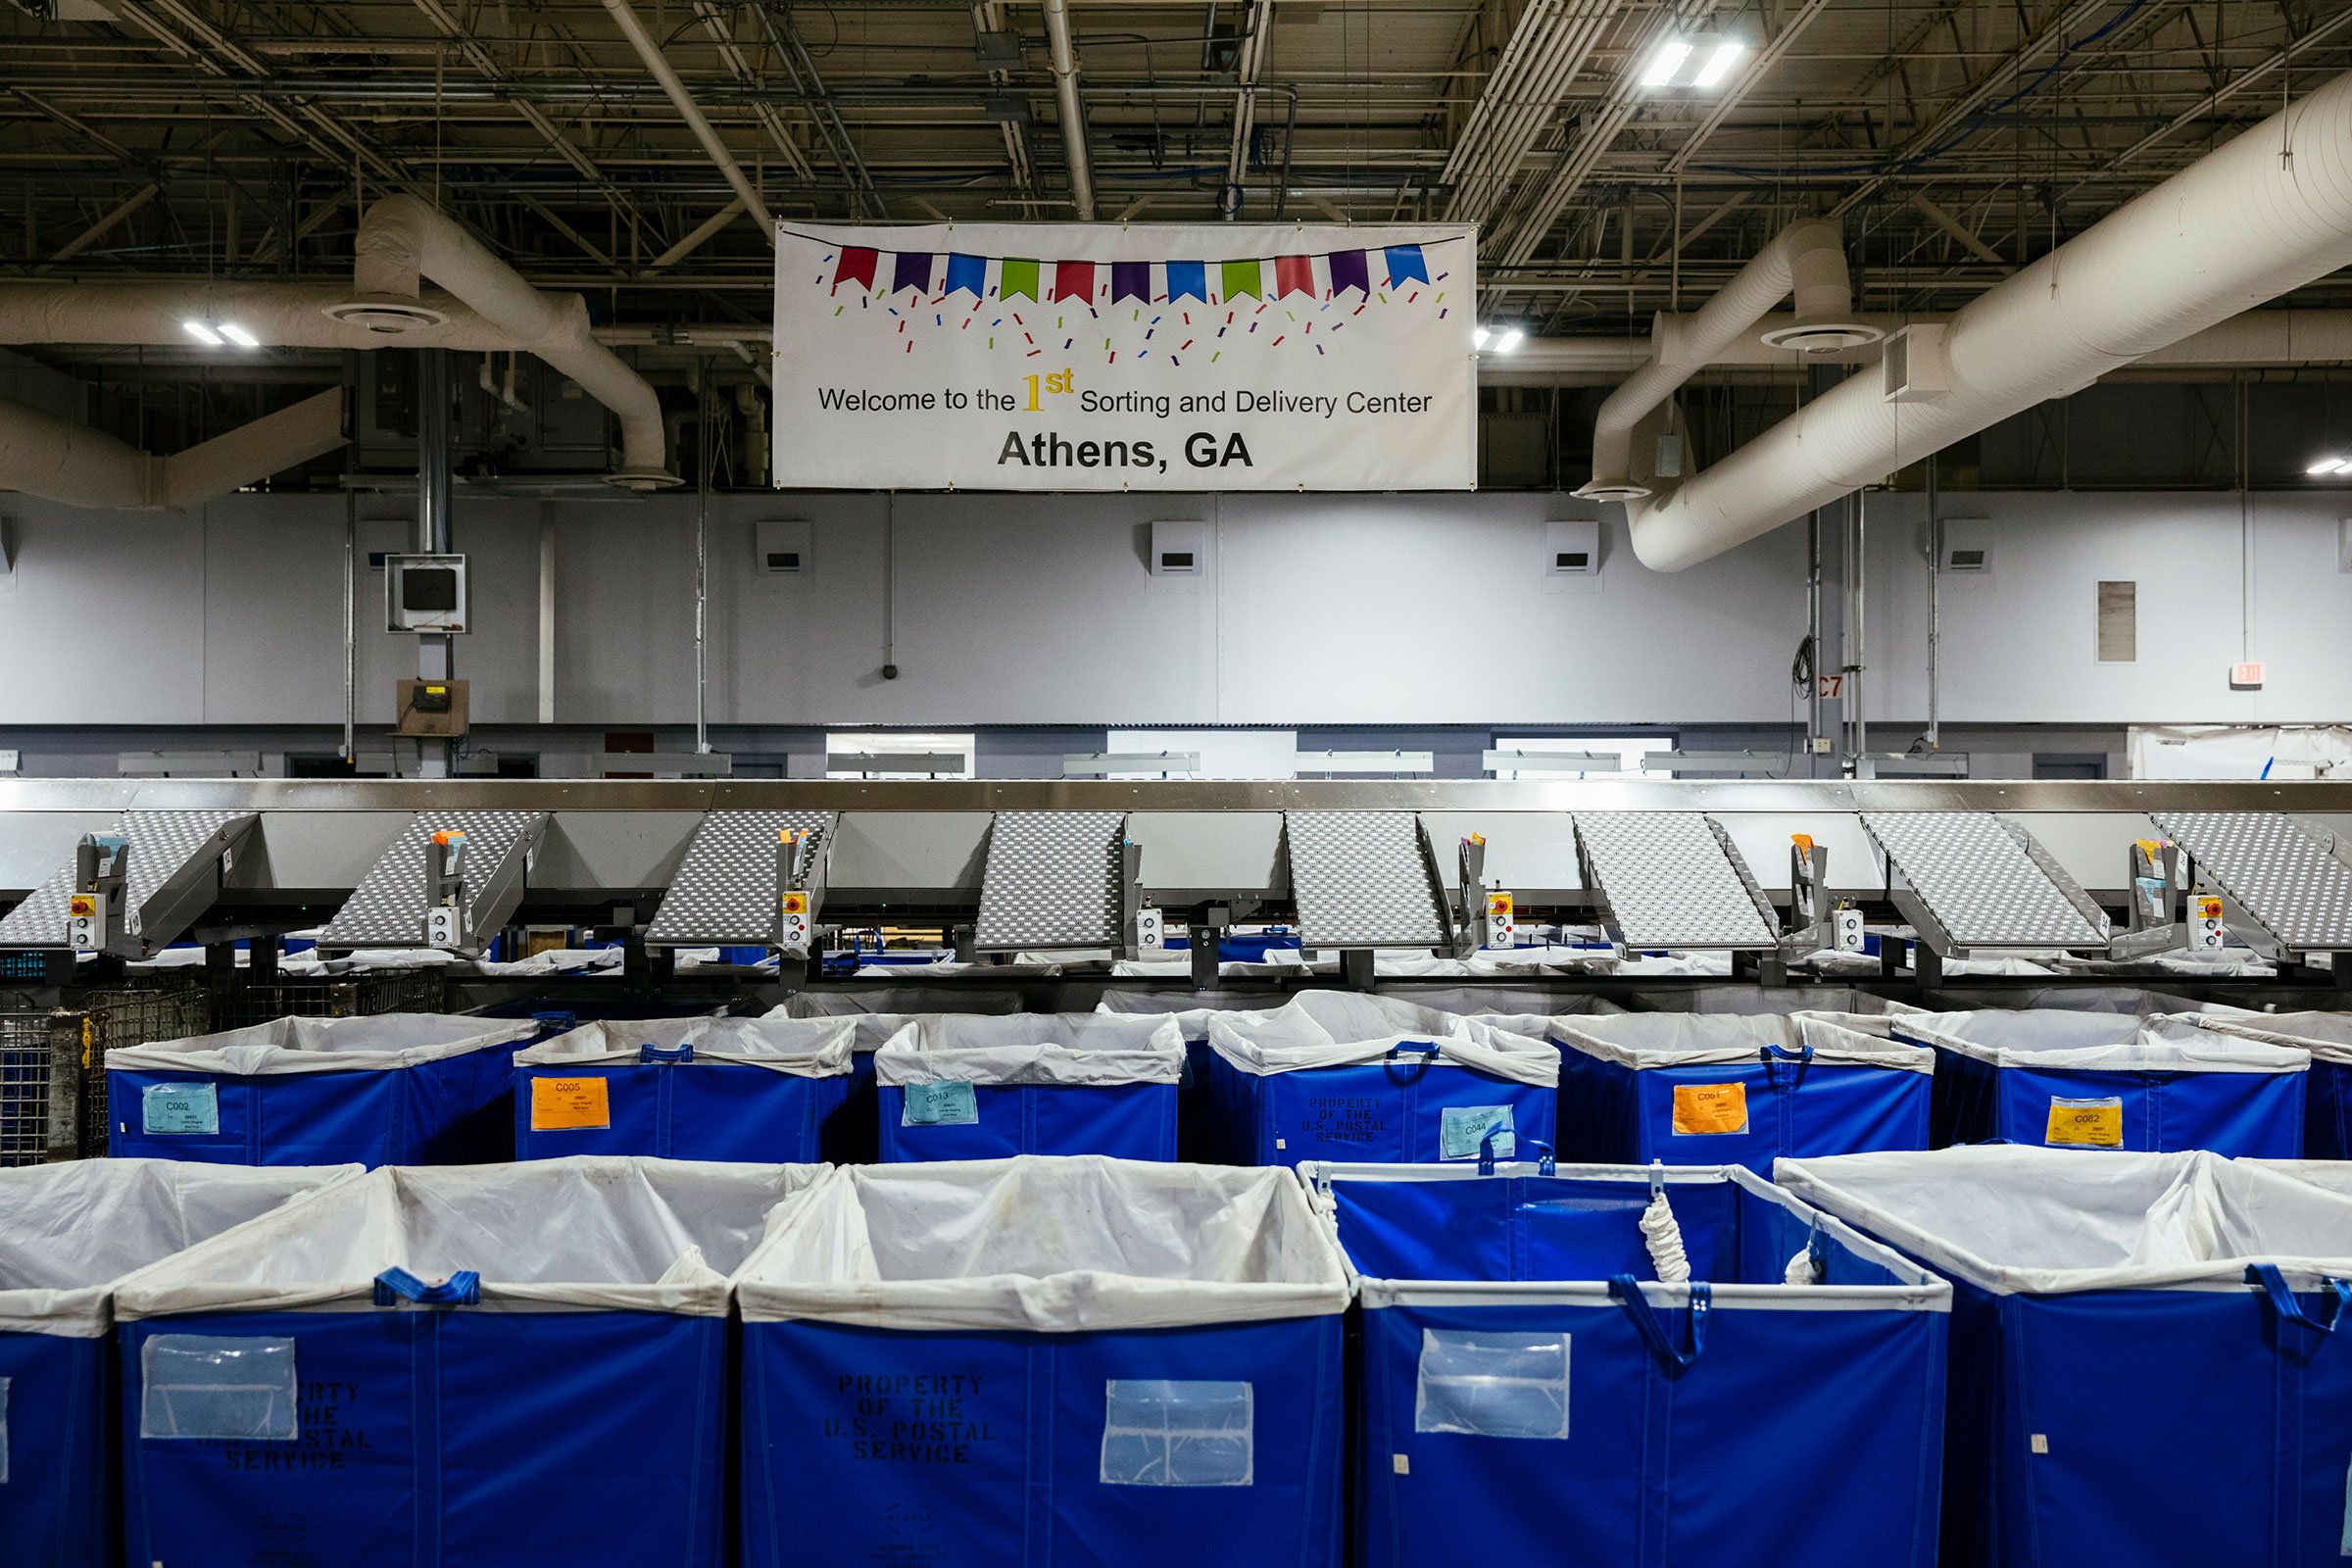 Efforts to modernize an existing mail hub has already begun at the first Sorting and Delivery Center in Athens, Georgia February 3, 2023. United States Postmaster General Louis DeJoy plans to modernize the outdated postal system.Photo by Kendrick Brinson